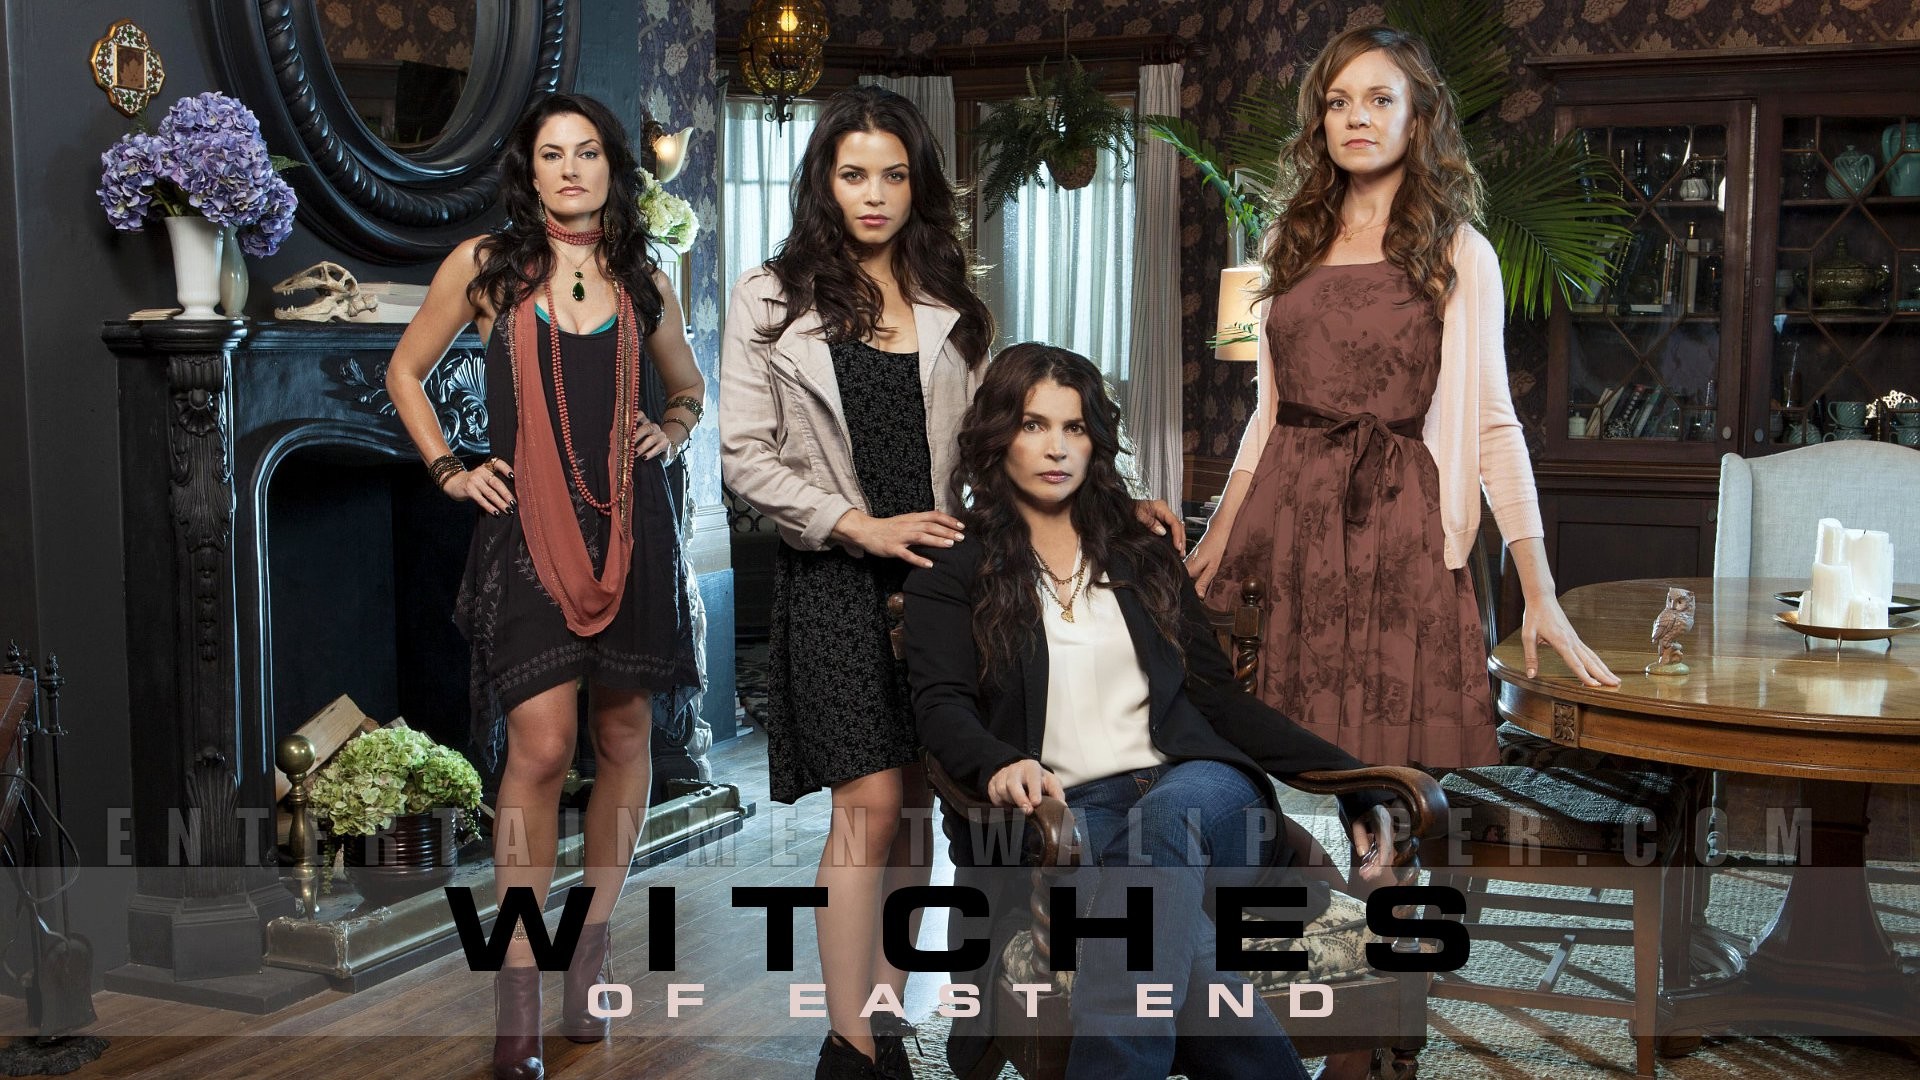 1920x1080 Witches of East End images Witches of East End HD wallpaper and background  photos